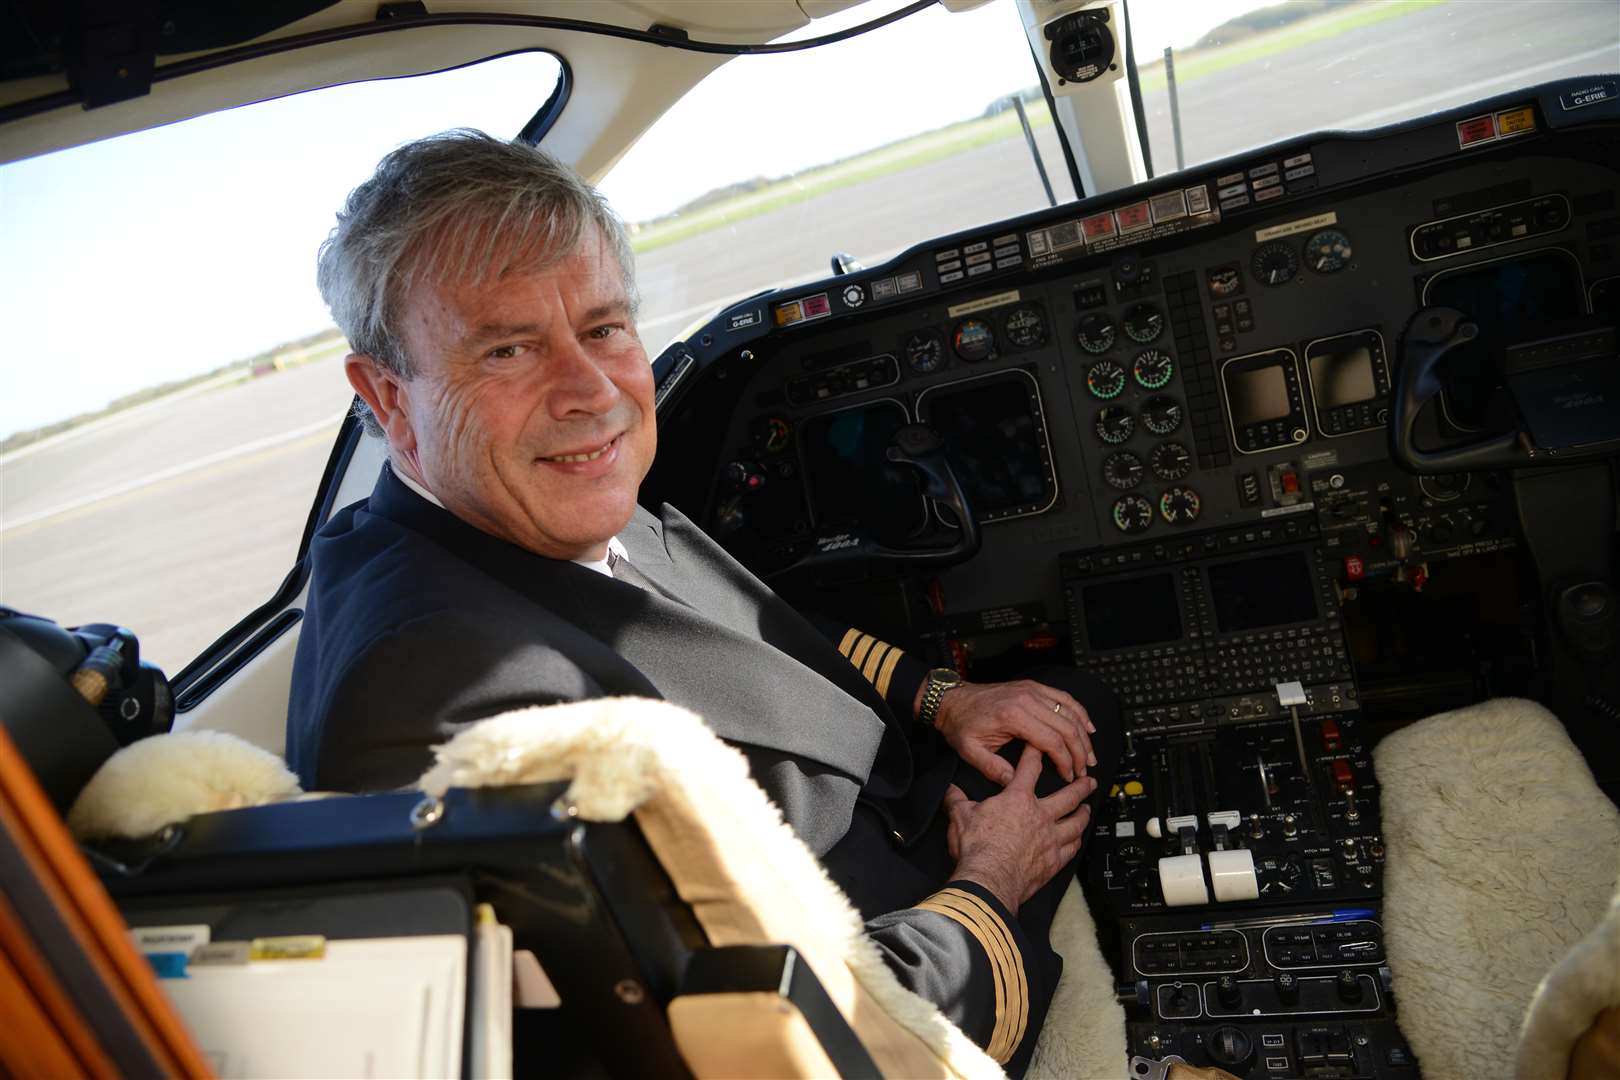 World Executive Airways chief executive Captain Jonathan Gordan at the helm of the firm's executive jet